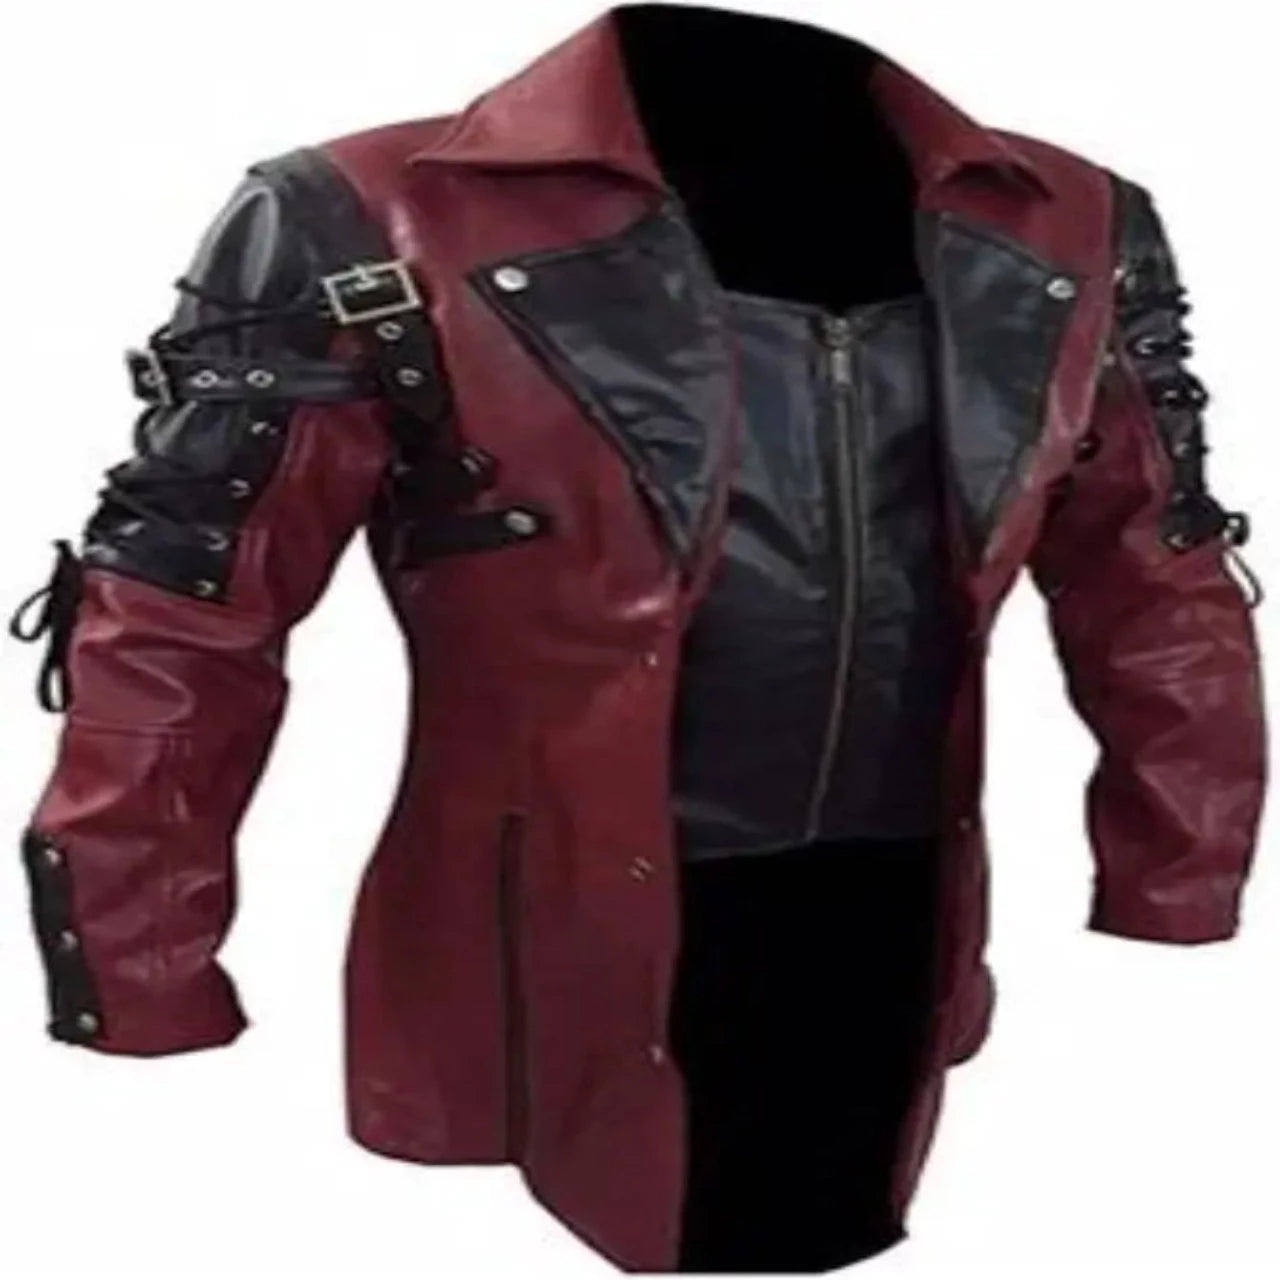 Men’s Steampunk Gothic Trench leather Coat